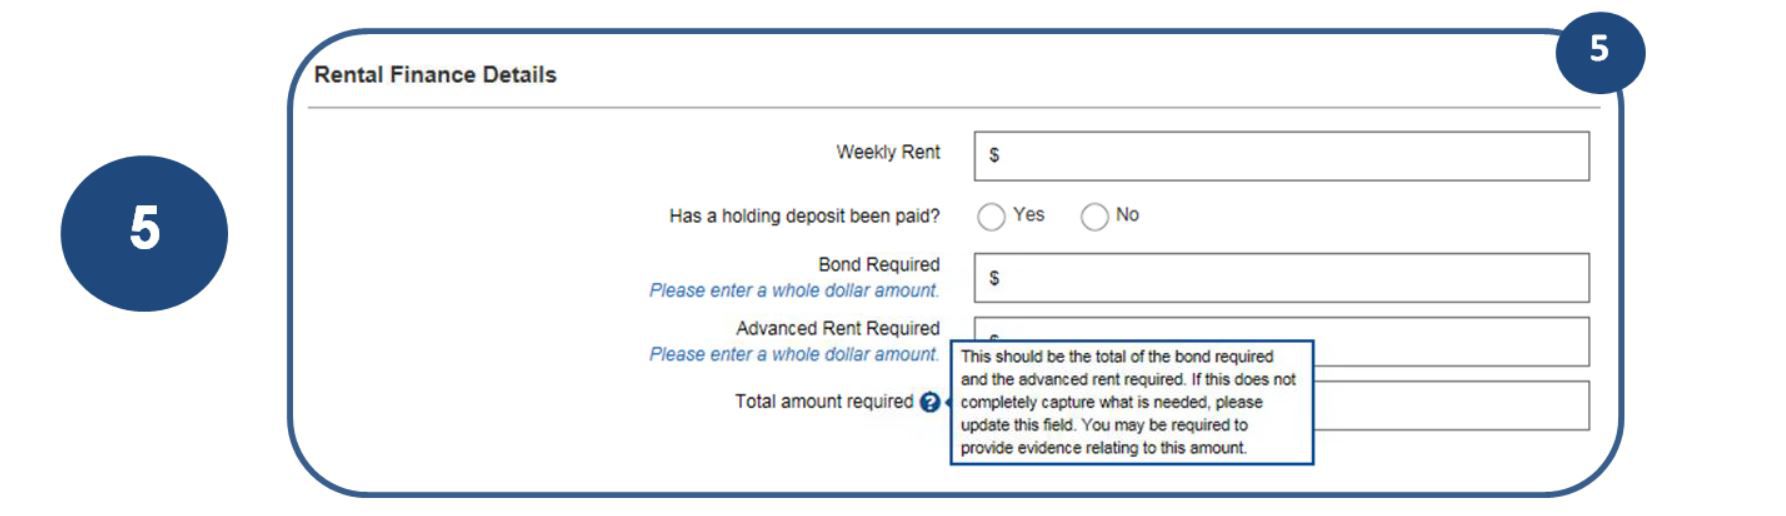 5. Complete the fields for Rental Finance details, ensuring all details are correct, especially total amount required.